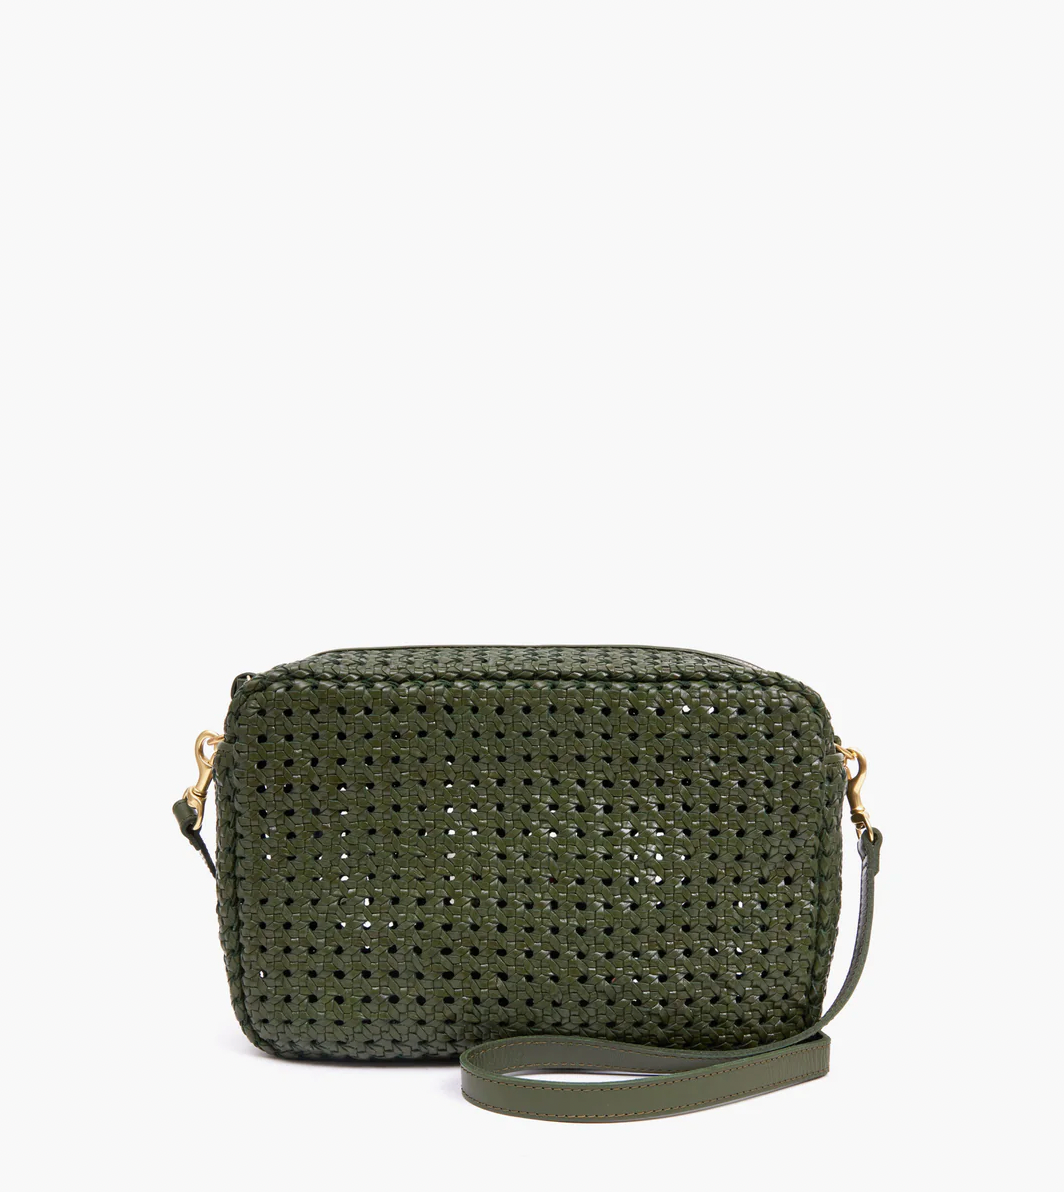 Clare V. Marisol Woven Leather Crossbody Bag in Toffee Diagonal Woven